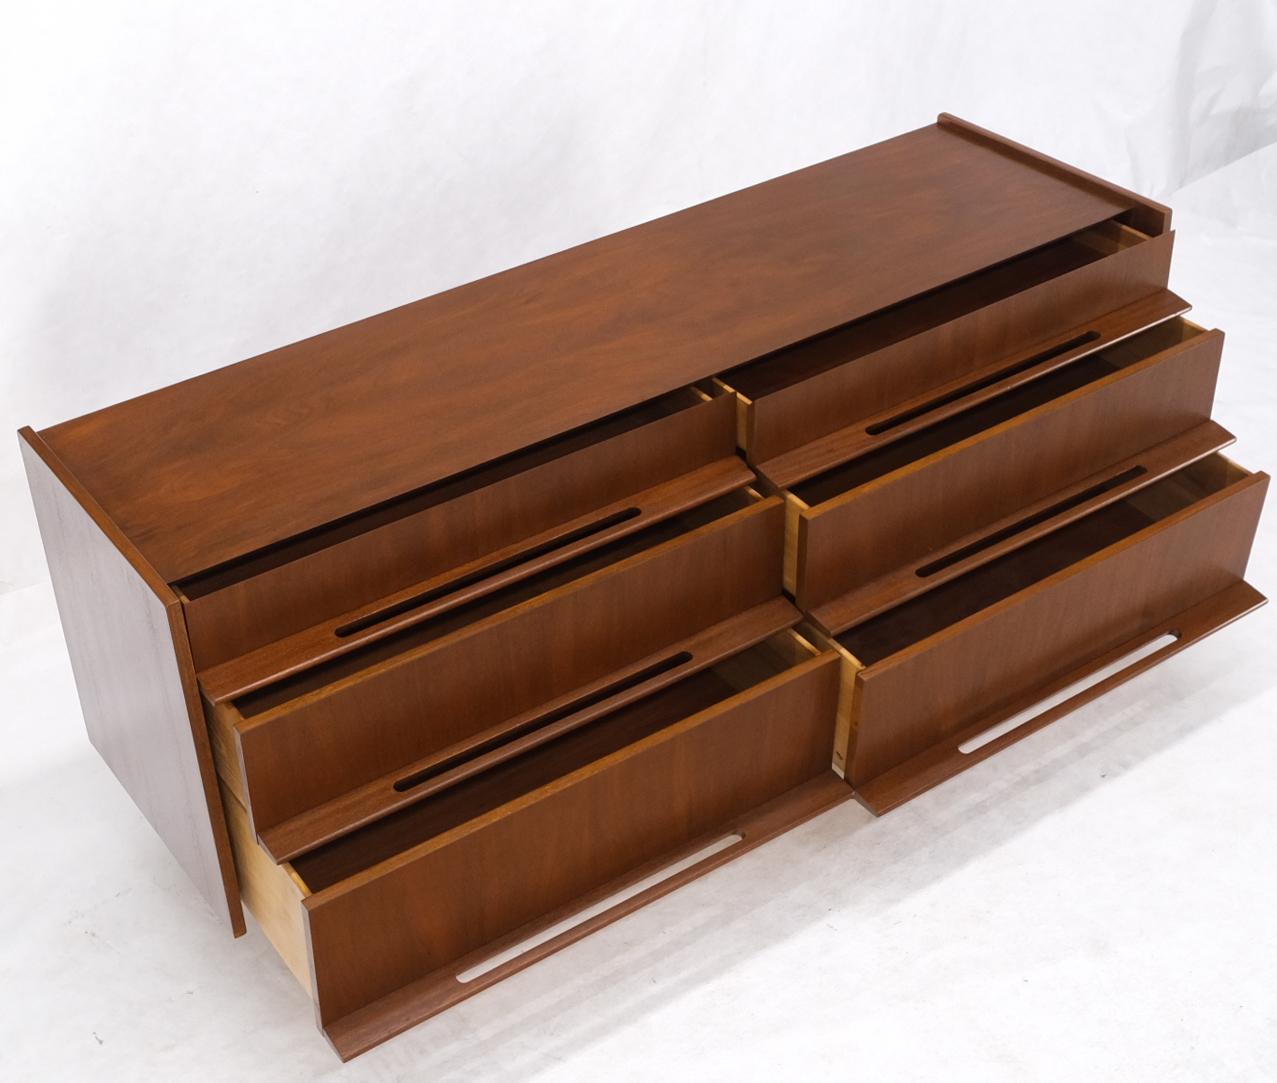 20th Century Edmund Spence Attributed Large 6 Drawers Walnut Dresser W/ Gallery Top Cone Legs For Sale